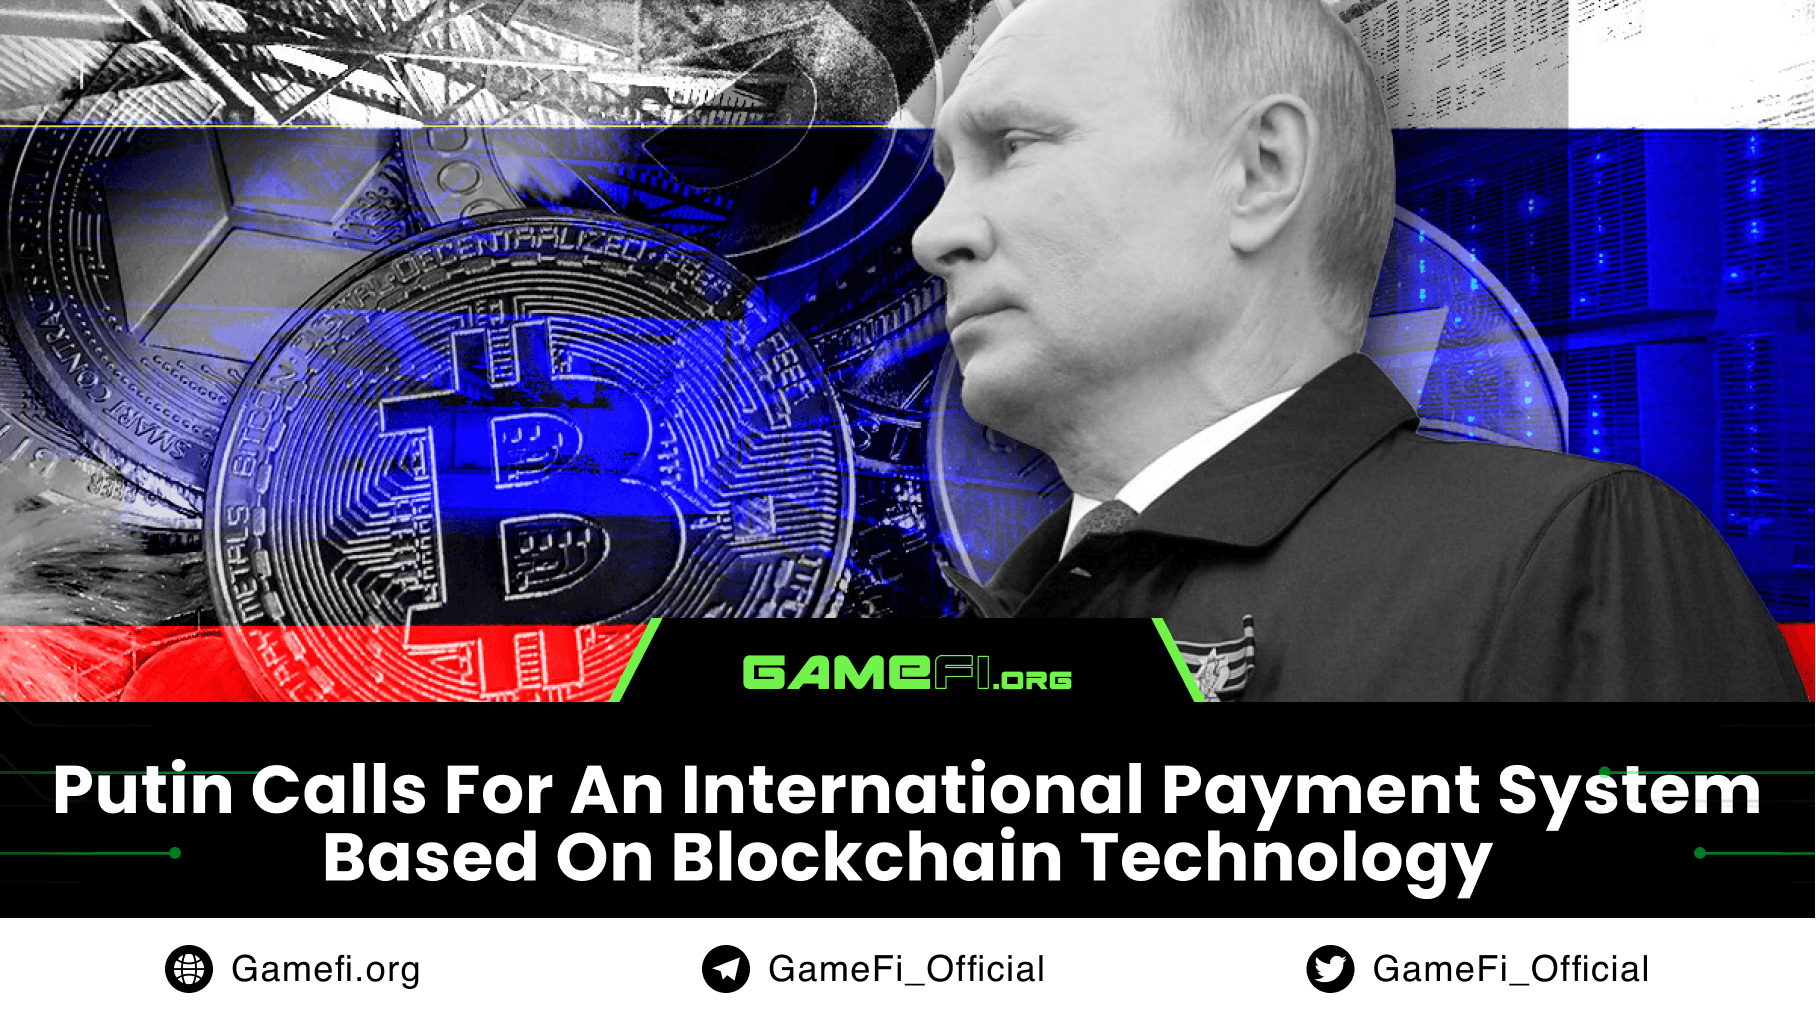 Putin Calls For An International Payment System Based On Blockchain Technology